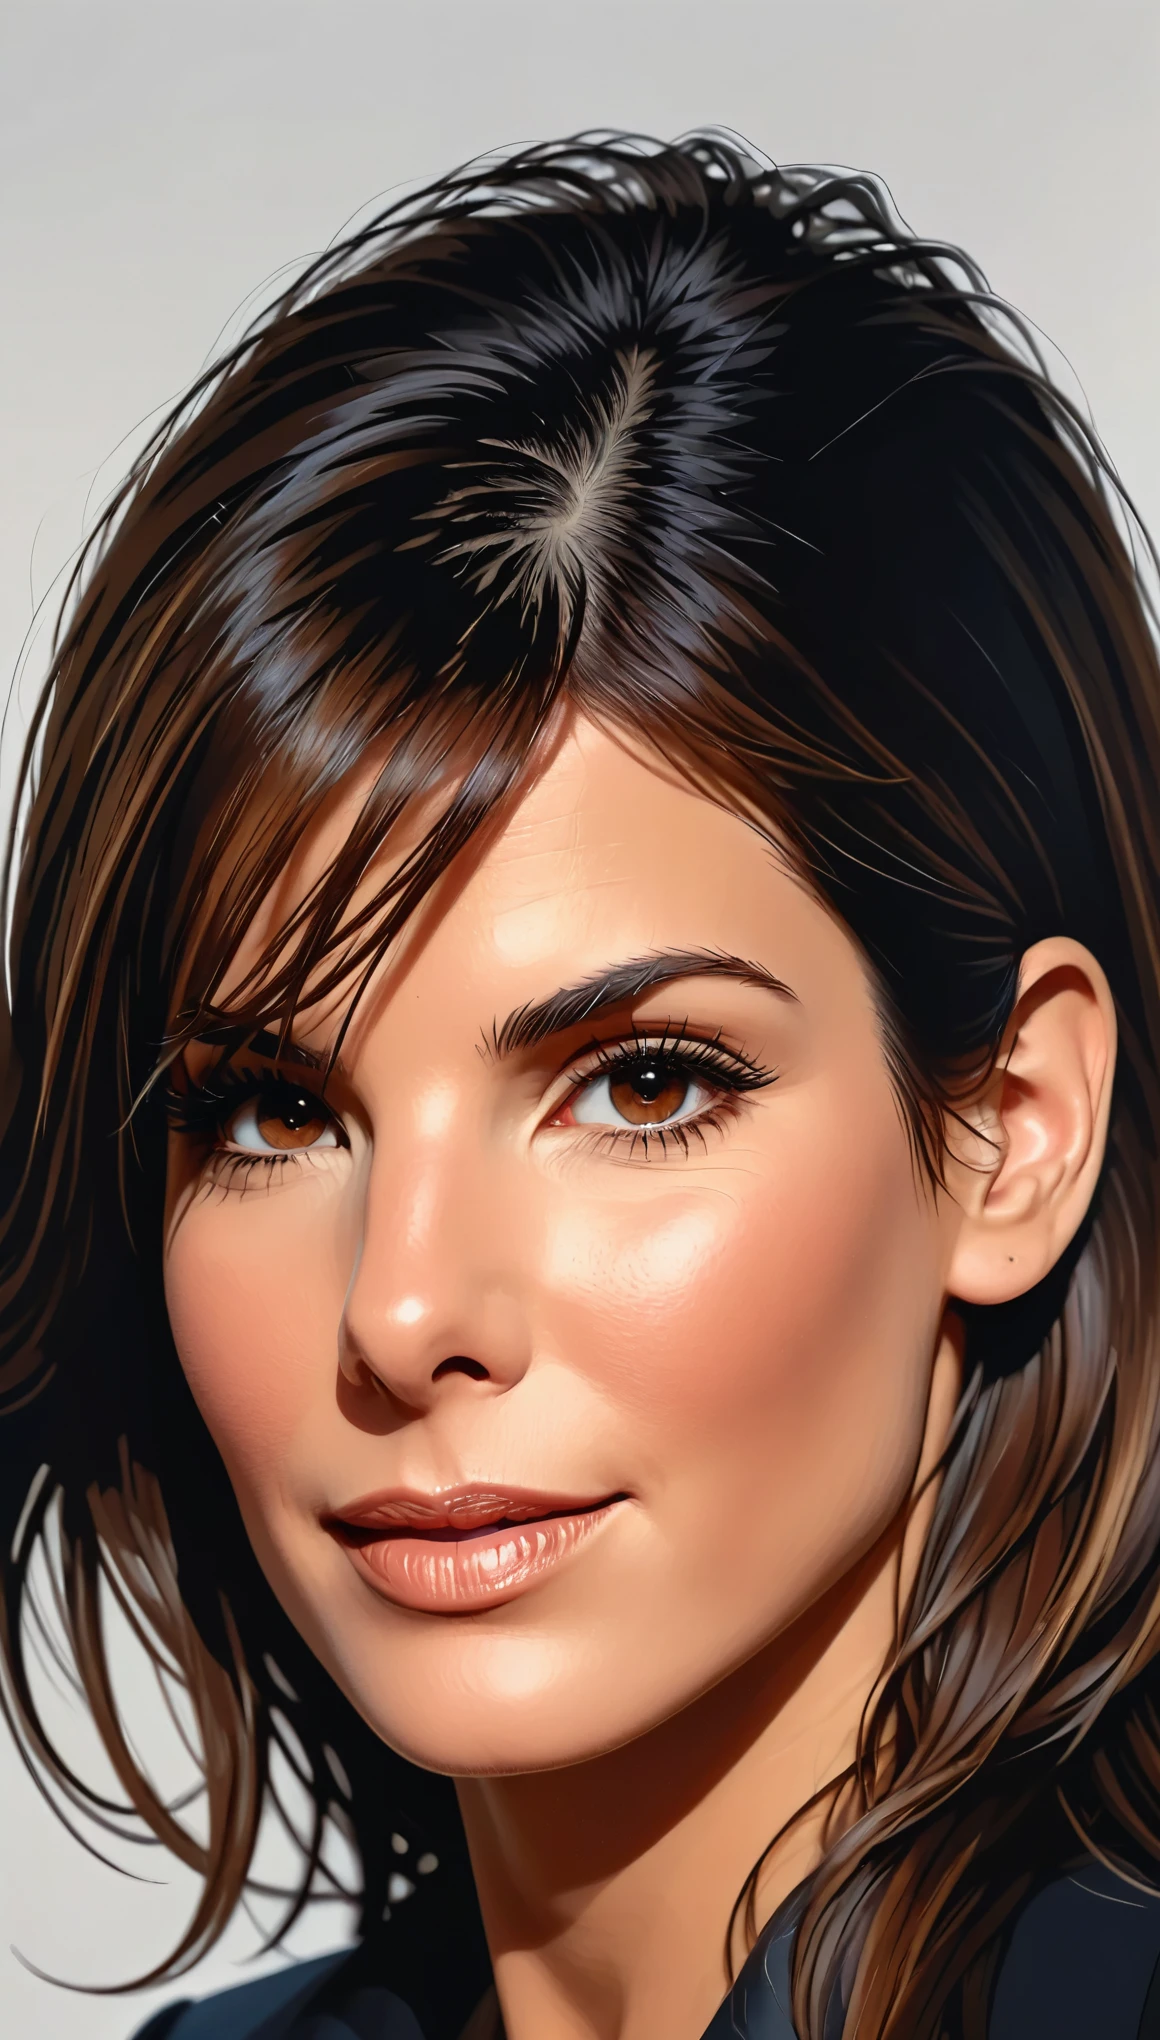 (best quality,4k,8k,highres,masterpiece:1.2), (vector art:1.2), ultra-detailed,(realistic,photorealistic,photo-realistic:1.37),(ohwx woman), ultra-fine painting,sharp focus,physically-based rendering,extreme detail description,professional,portraits, A close-up portrait of young Sandra Bullock's face rendered in vector art, The vector shapes should be highly detailed, with the best quality and resolution possible, such as 4k, 8k, or highres. The portrait should capture the essence of Sandra Bullock's face, The background can be minimal or non-distracting, putting the focus on Sandra Bullock's face. vectorized, vector art, 
